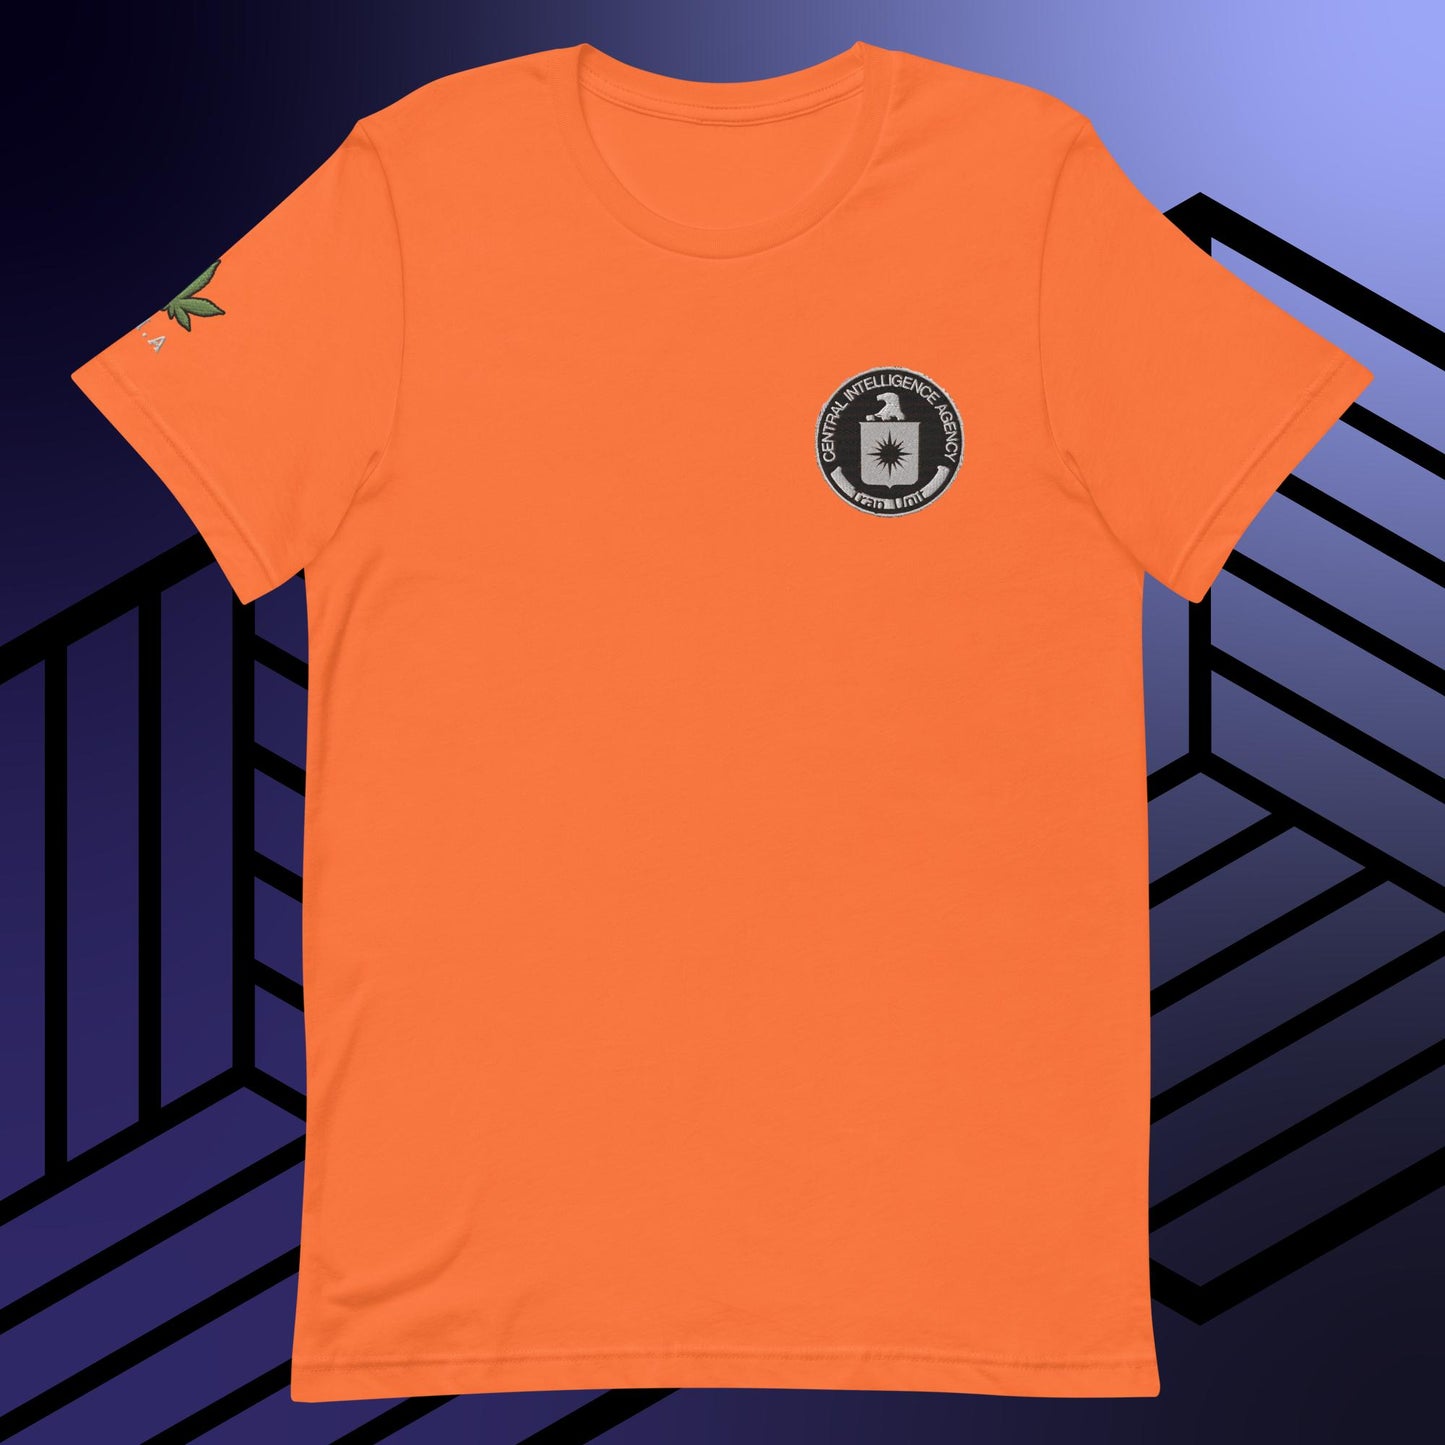 an orange t - shirt with a black and white logo